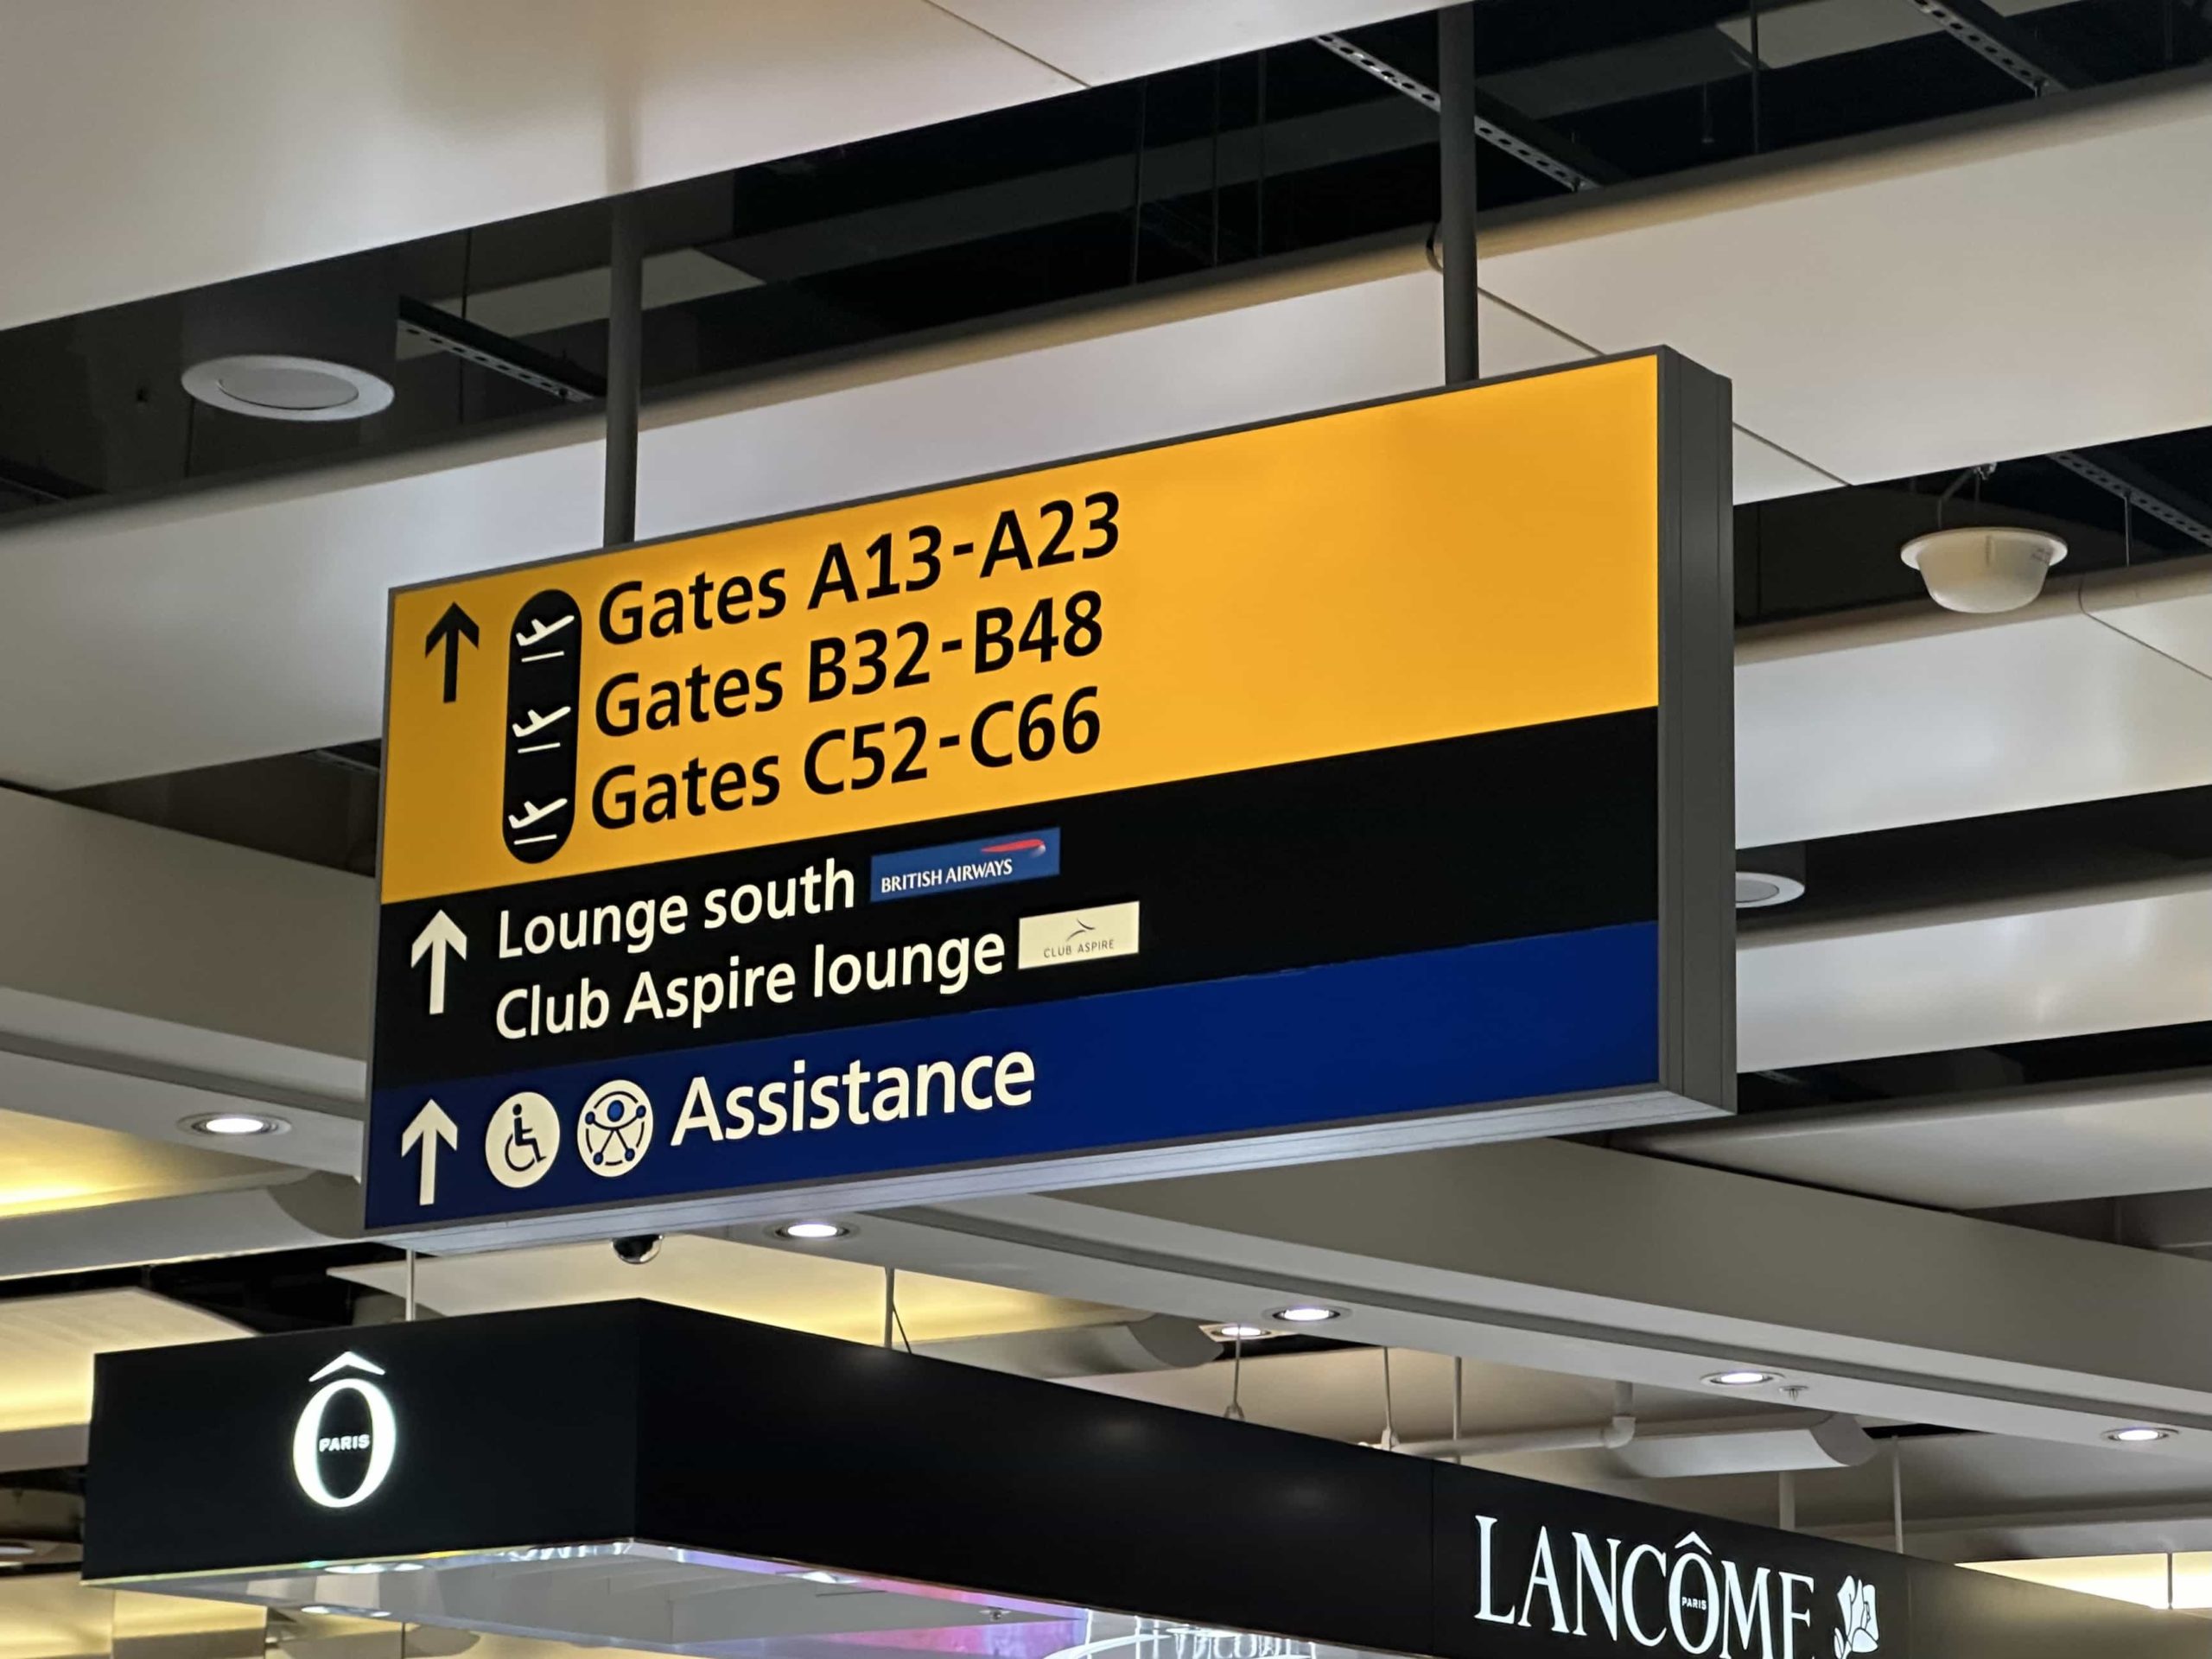 Overhead signage in an airport terminal directing to gates, lounges, and assistance